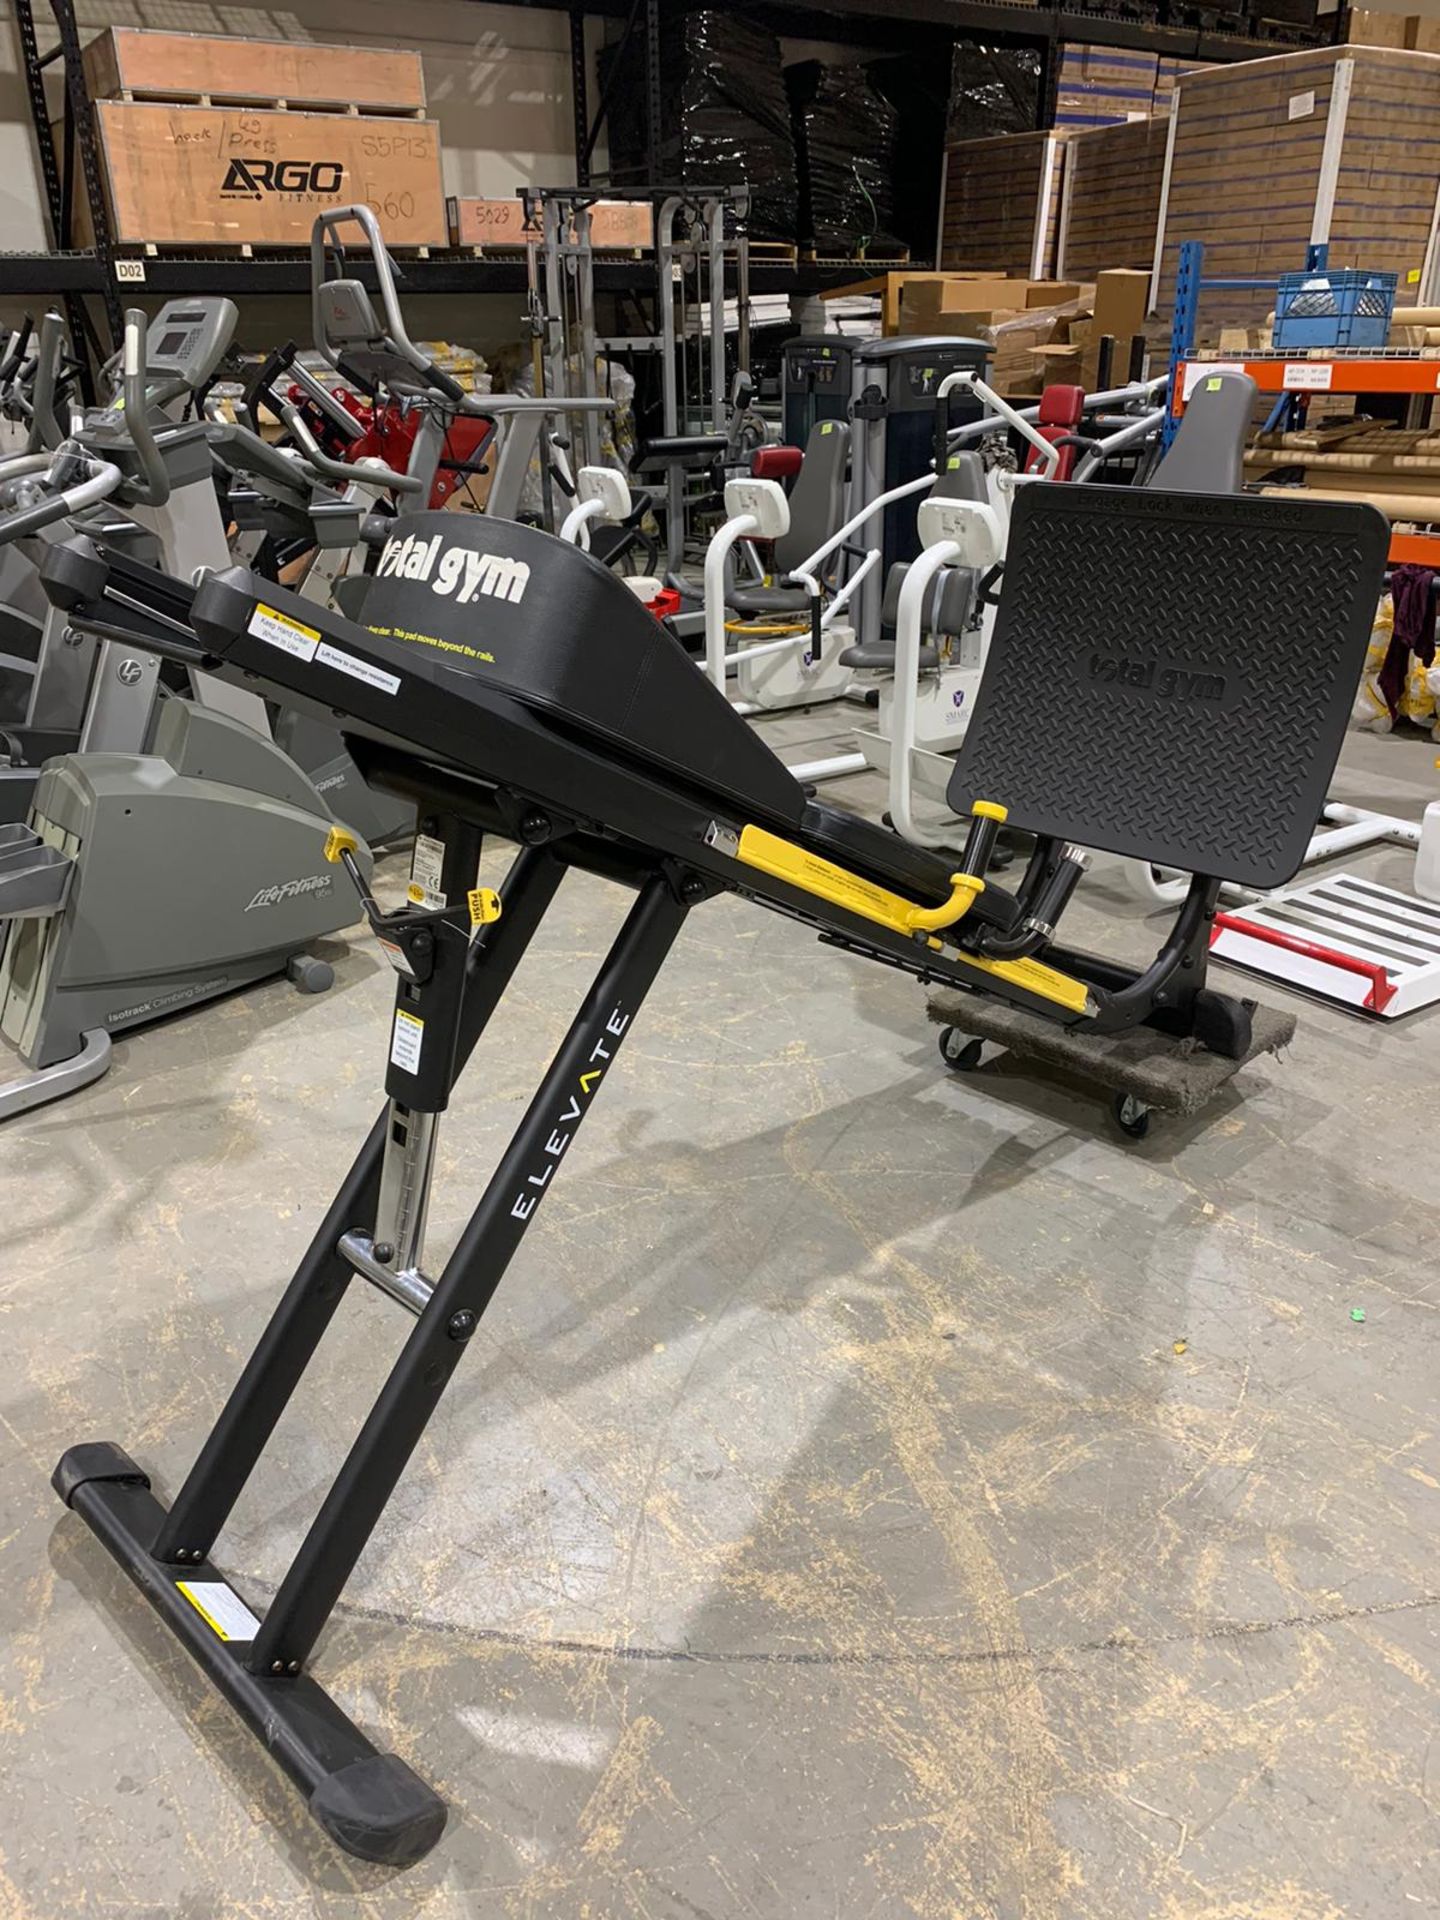 TOTAL GYM ELEVATE JUMP TRAINER MACHINE - Image 4 of 4